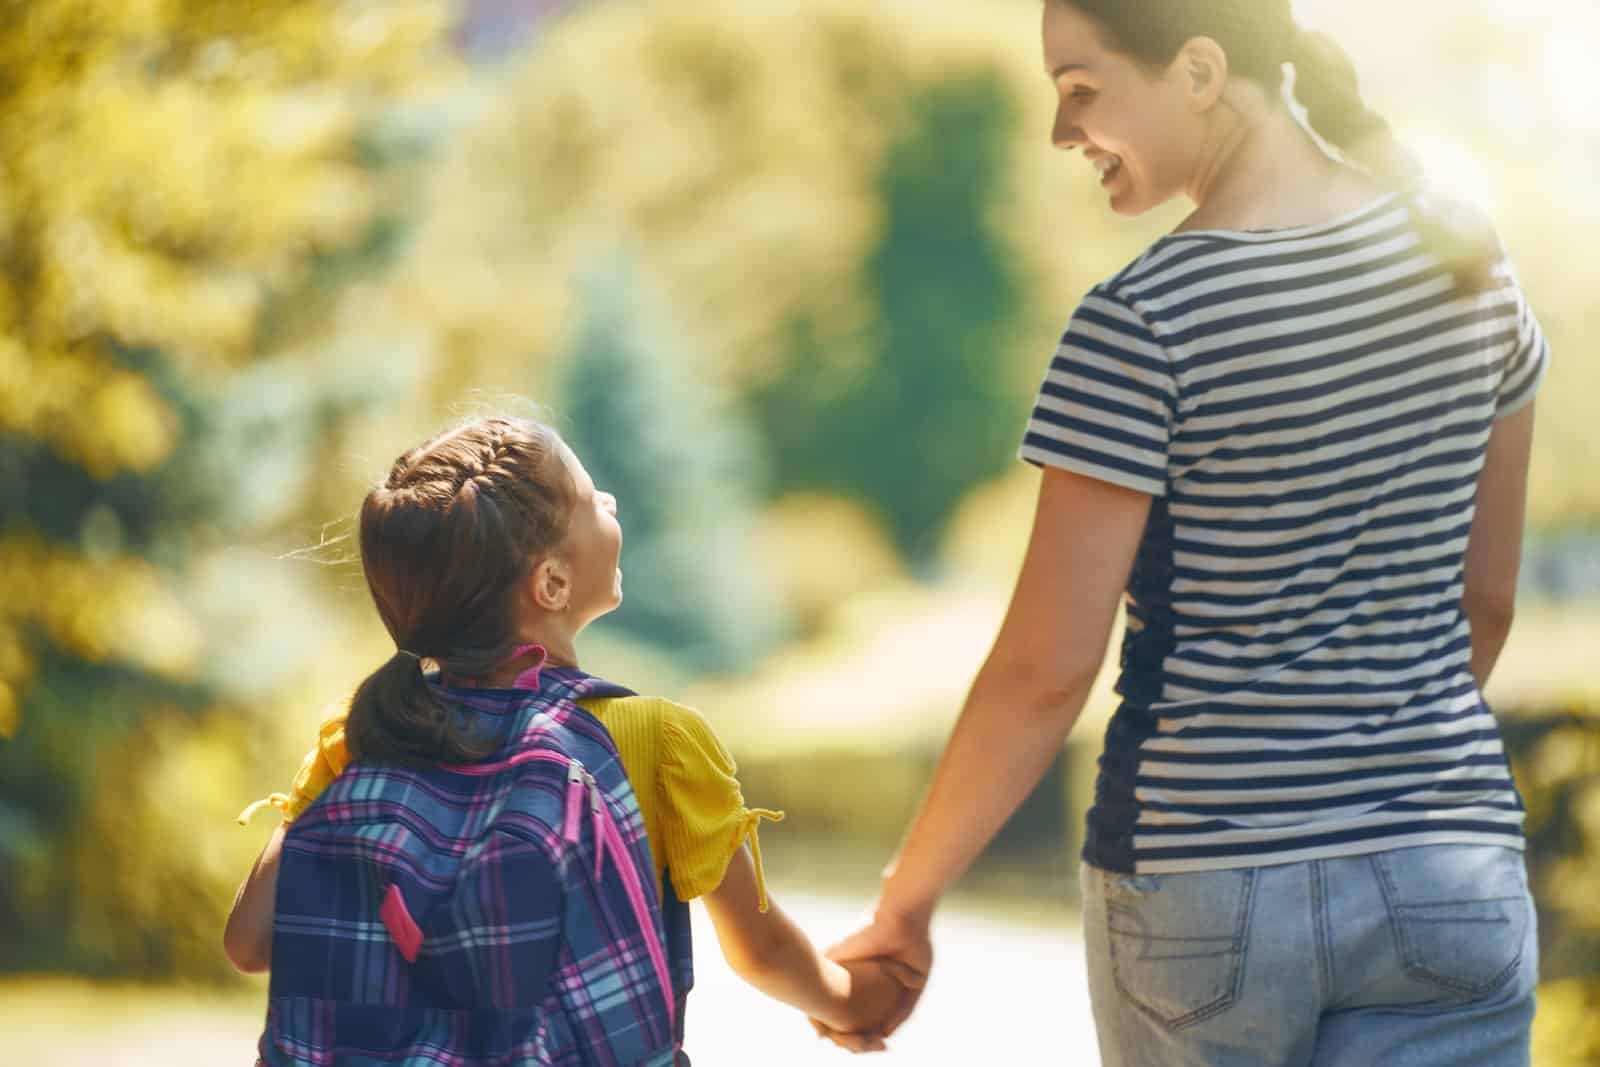 Image Credit: Shutterstock / Yuganov Konstantin <p><span>Research shows that children who feel loved and supported by their parents tend to have higher self-esteem, better emotional regulation, and stronger social relationships. Show your love through words, actions, and physical affection. Spend quality time together and actively listen to your child’s thoughts and feelings without judgment.</span></p>